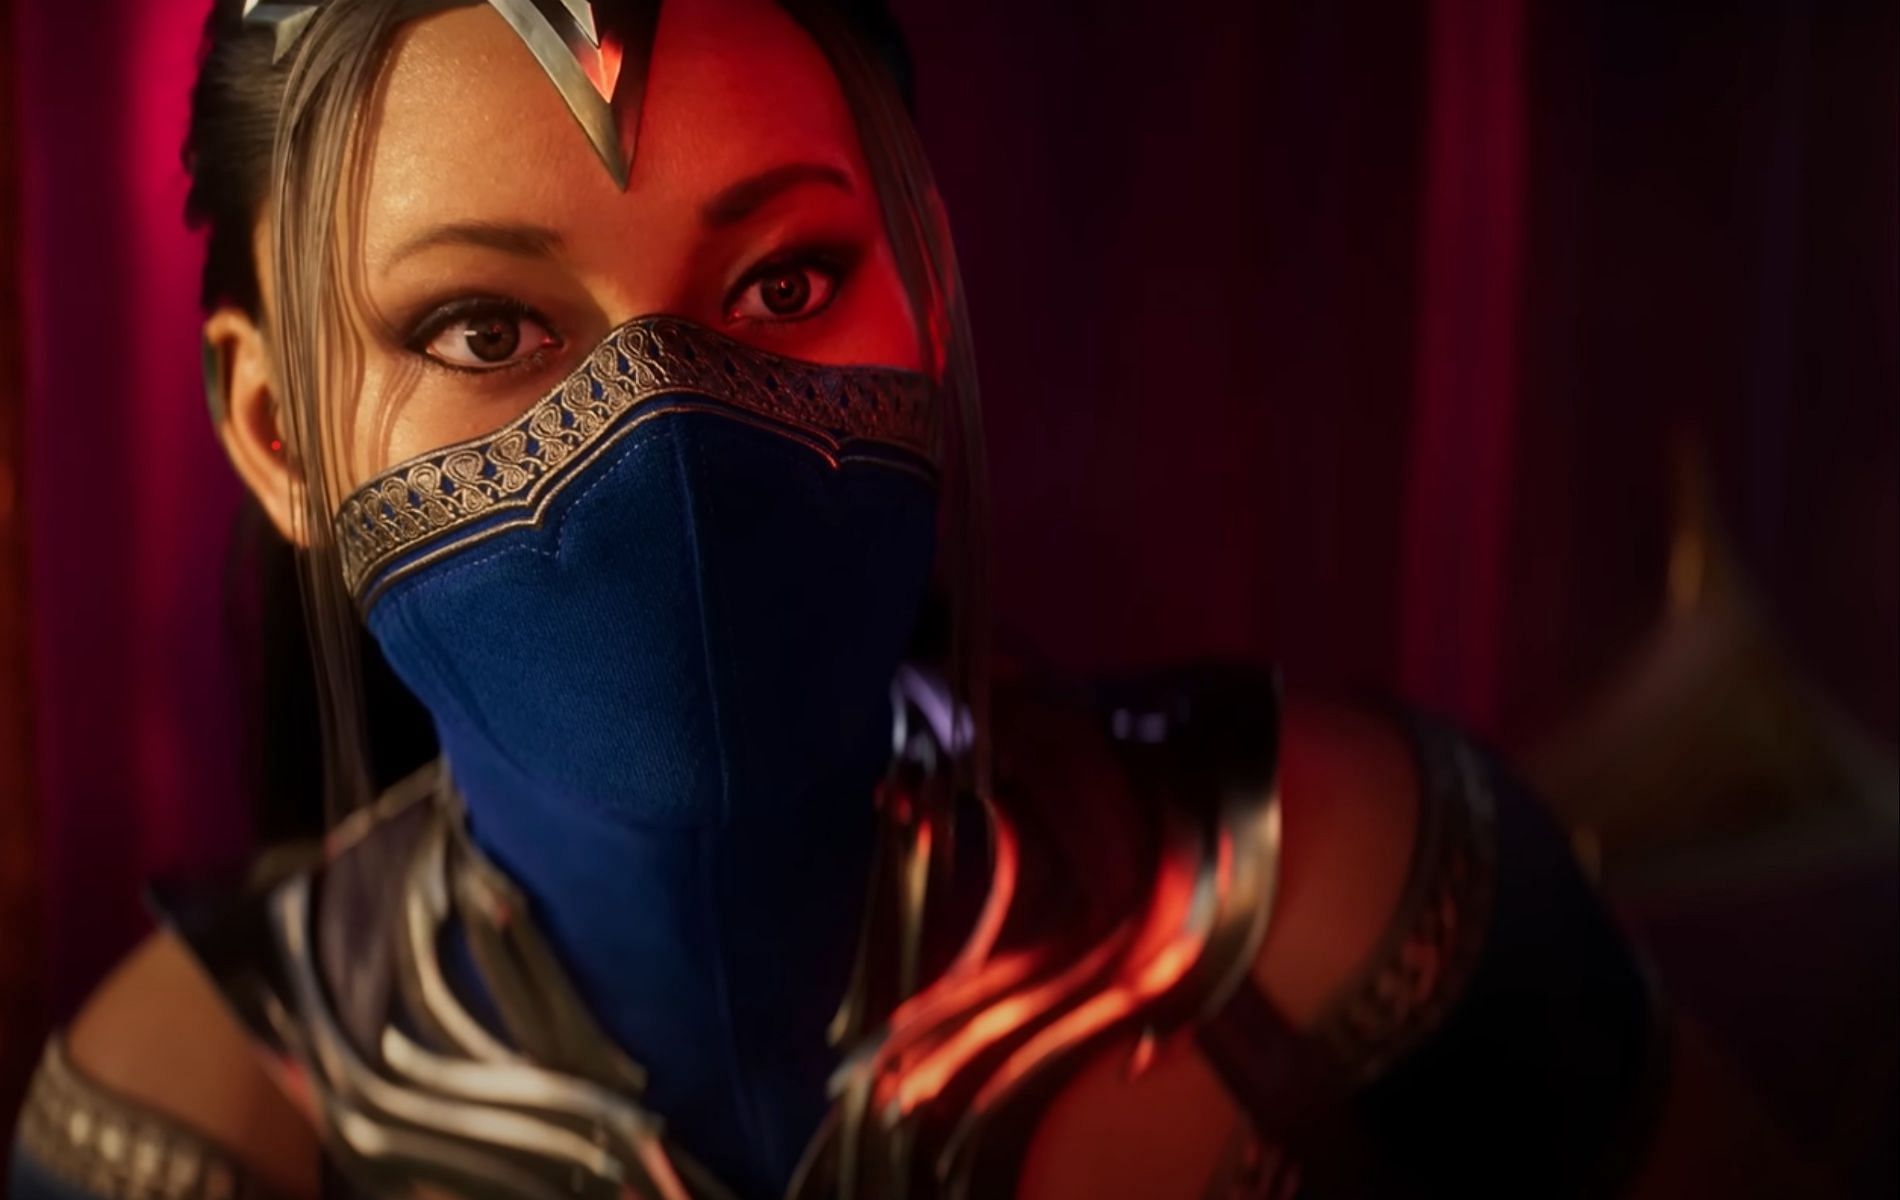 Mortal Kombat 1 pre-order guide: where to get every edition